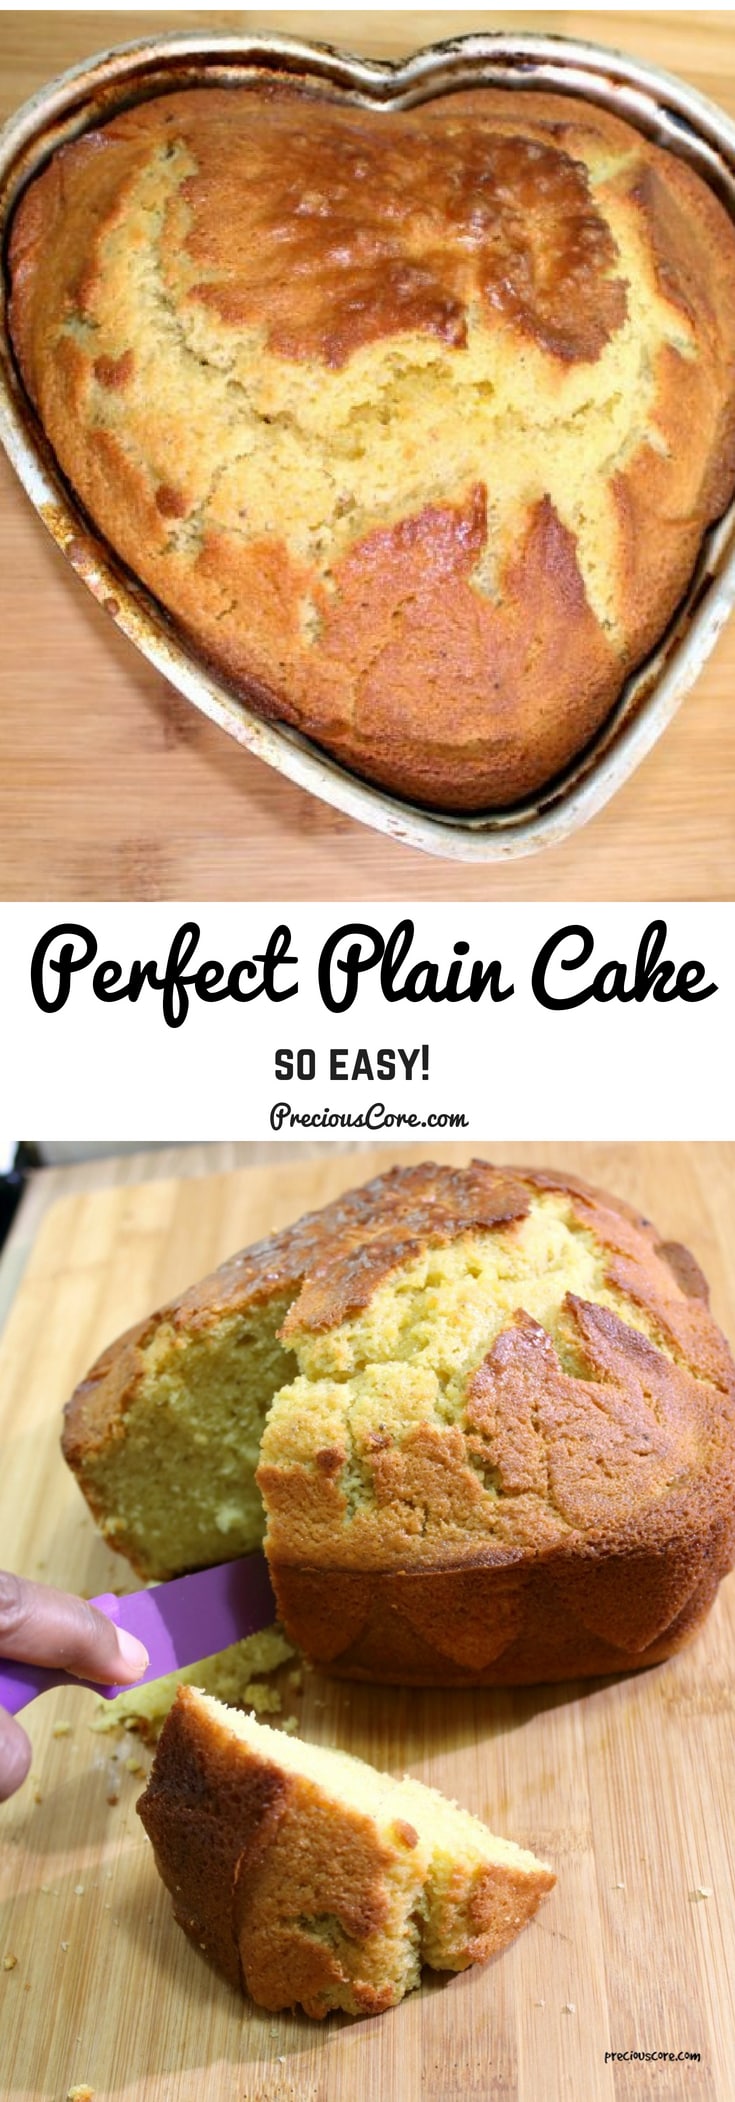 I have baked this plain cake more times than I count and every single time it comes out perfect. This is how my Food and Nutrition teacher taught me how to bake cake in my school days. It is really the perfect plain cake recipe! Get the recipe on preciouscore.com. #baking #desserts #cakes